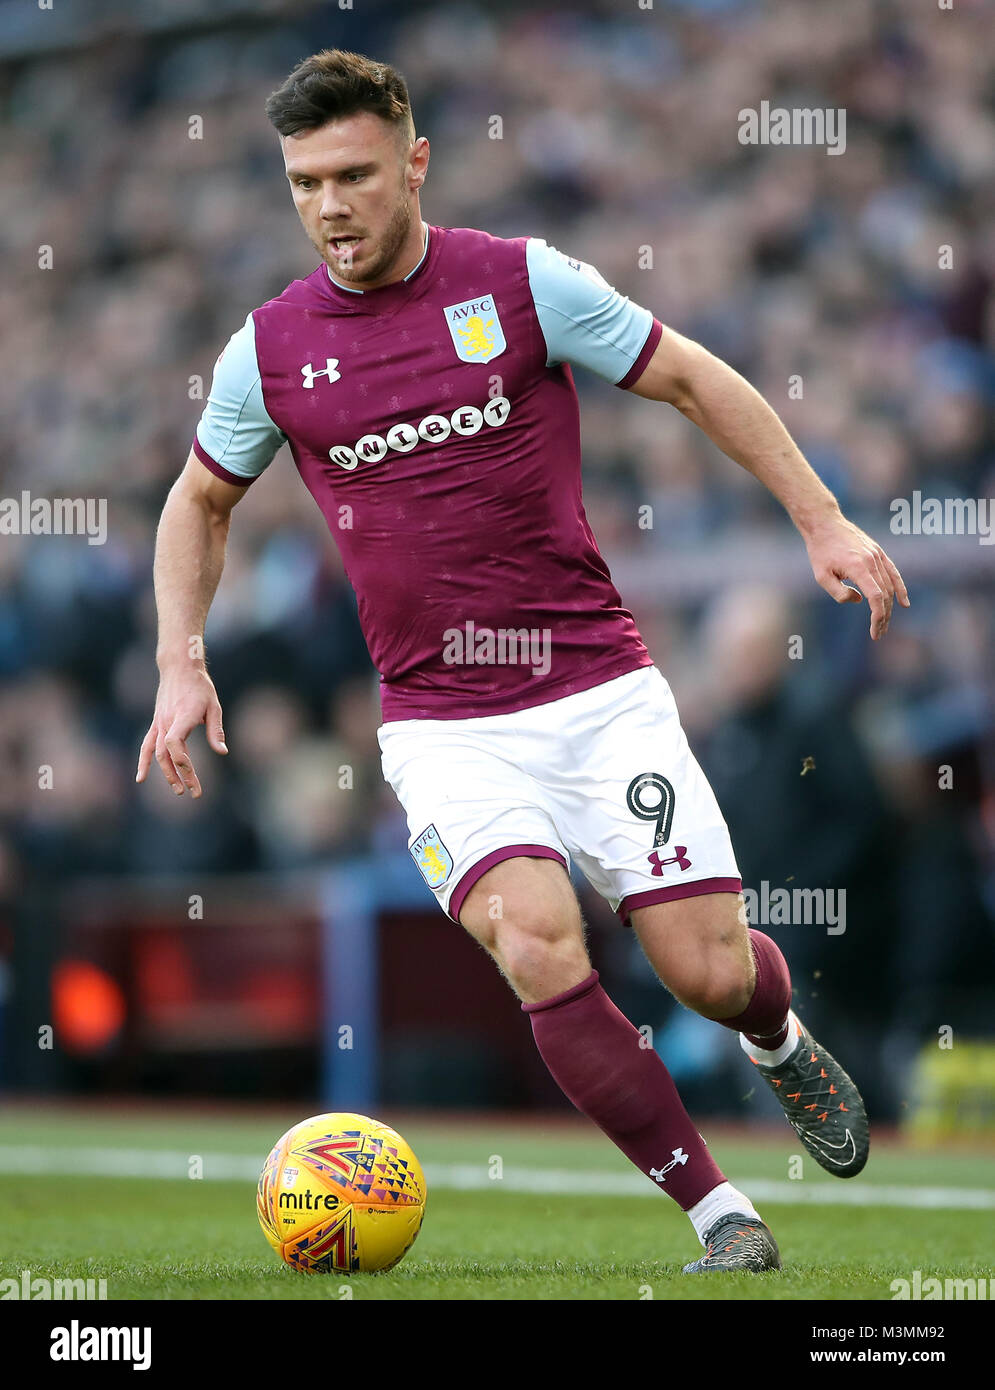 Aston Villa's Scott Hogan during the Premier League match at Villa Park, Birmingham. PRESS ASSOCIATION Photo. Picture date: Sunday February 11, 2018. See PA story SOCCER Villa. Photo credit should read: Nick Potts/PA Wire. RESTRICTIONS: No use with unauthorised audio, video, data, fixture lists, club/league logos or 'live' services. Online in-match use limited to 75 images, no video emulation. No use in betting, games or single club/league/player publications. Stock Photo